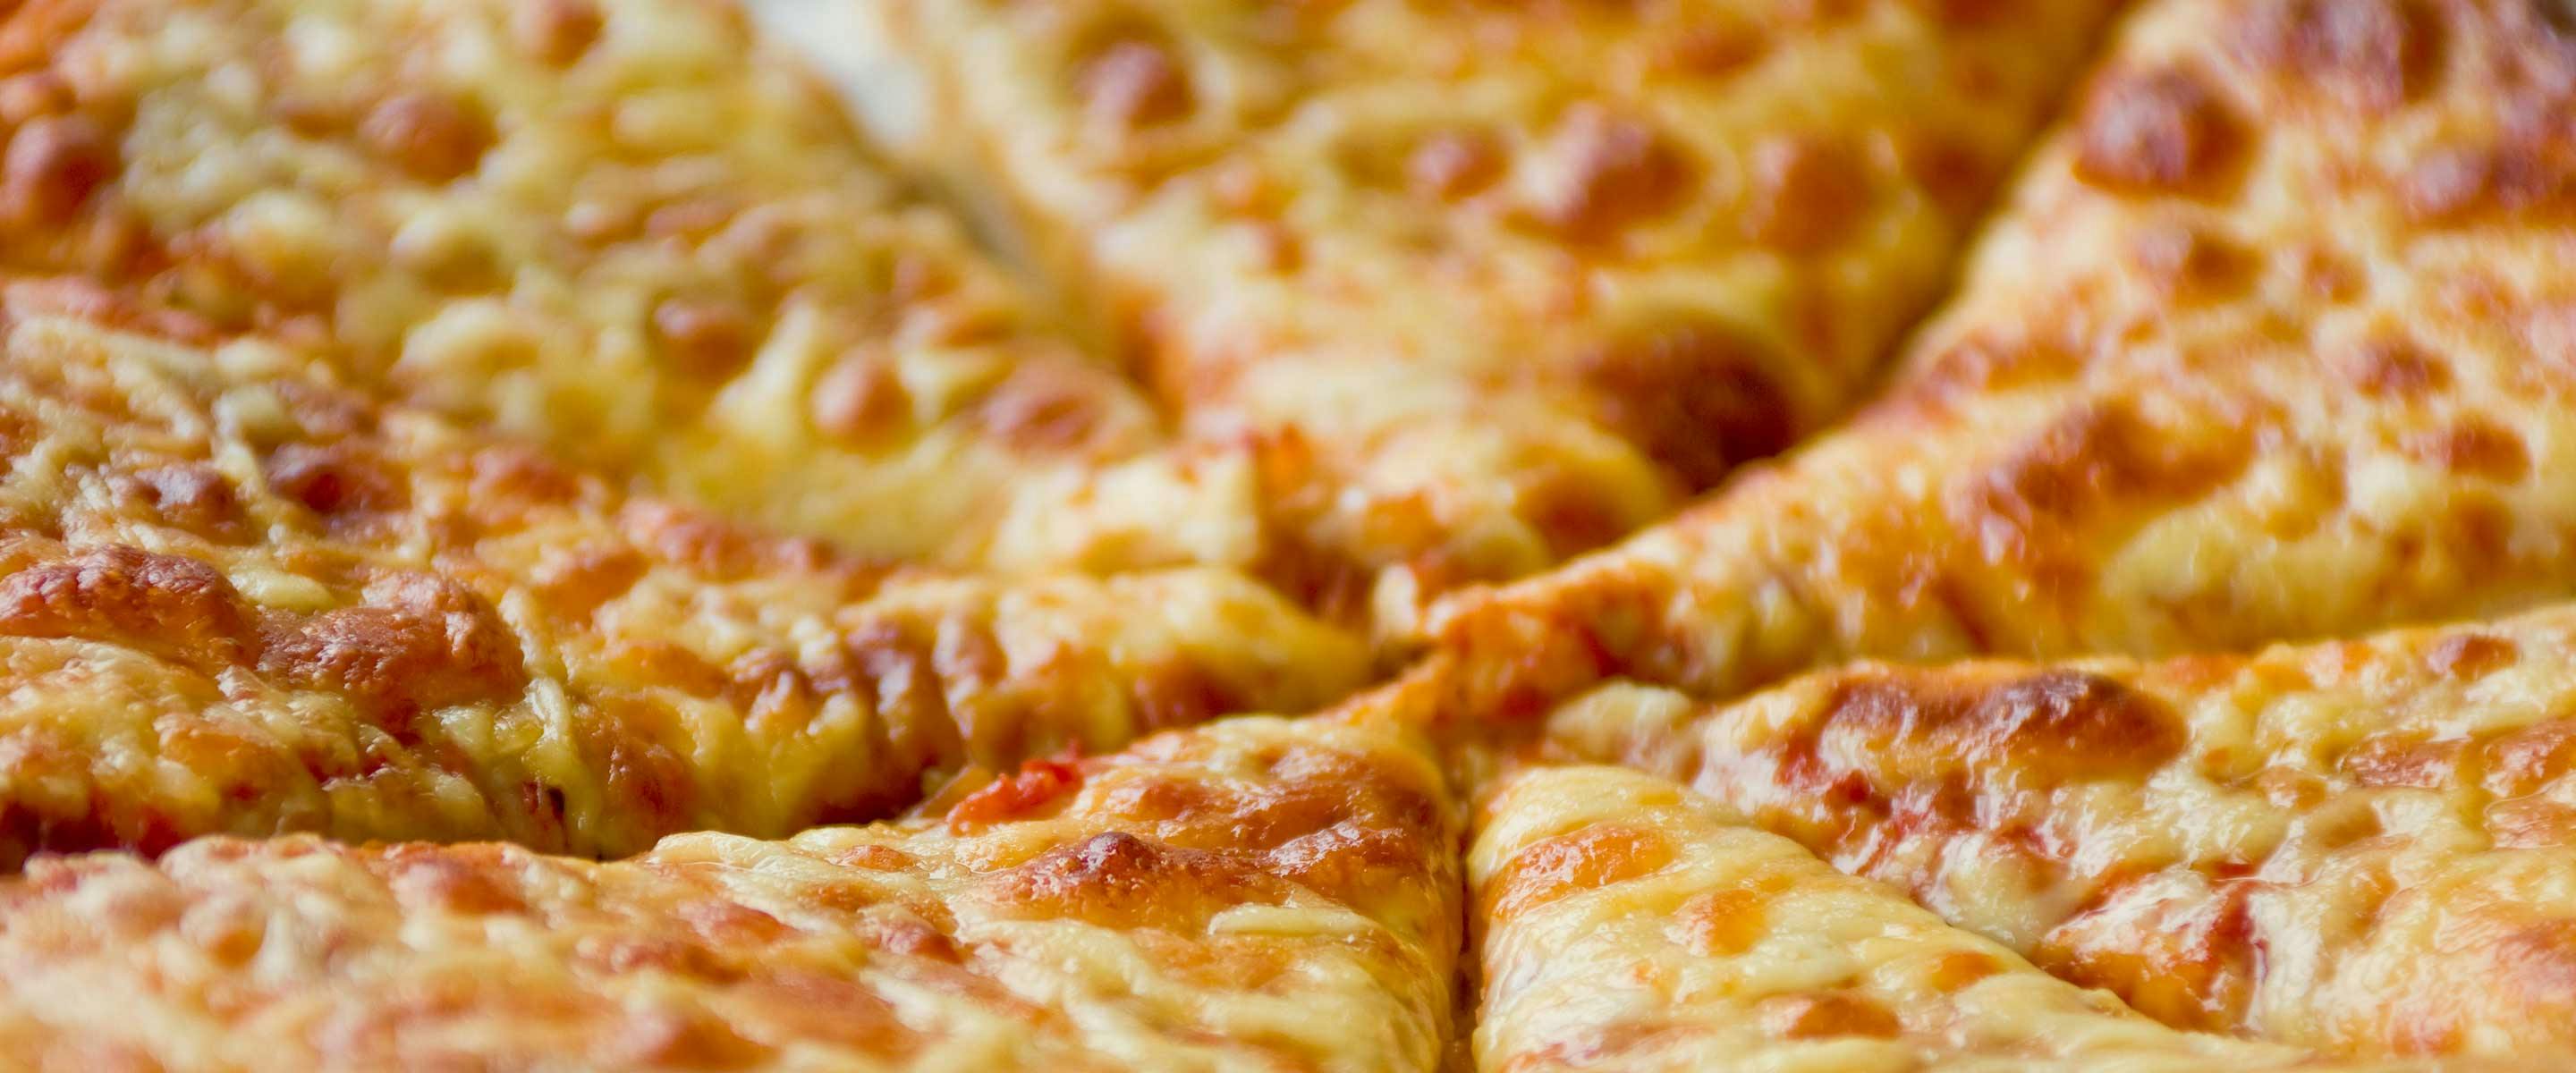 delicious warm cheese pizza ready to eat